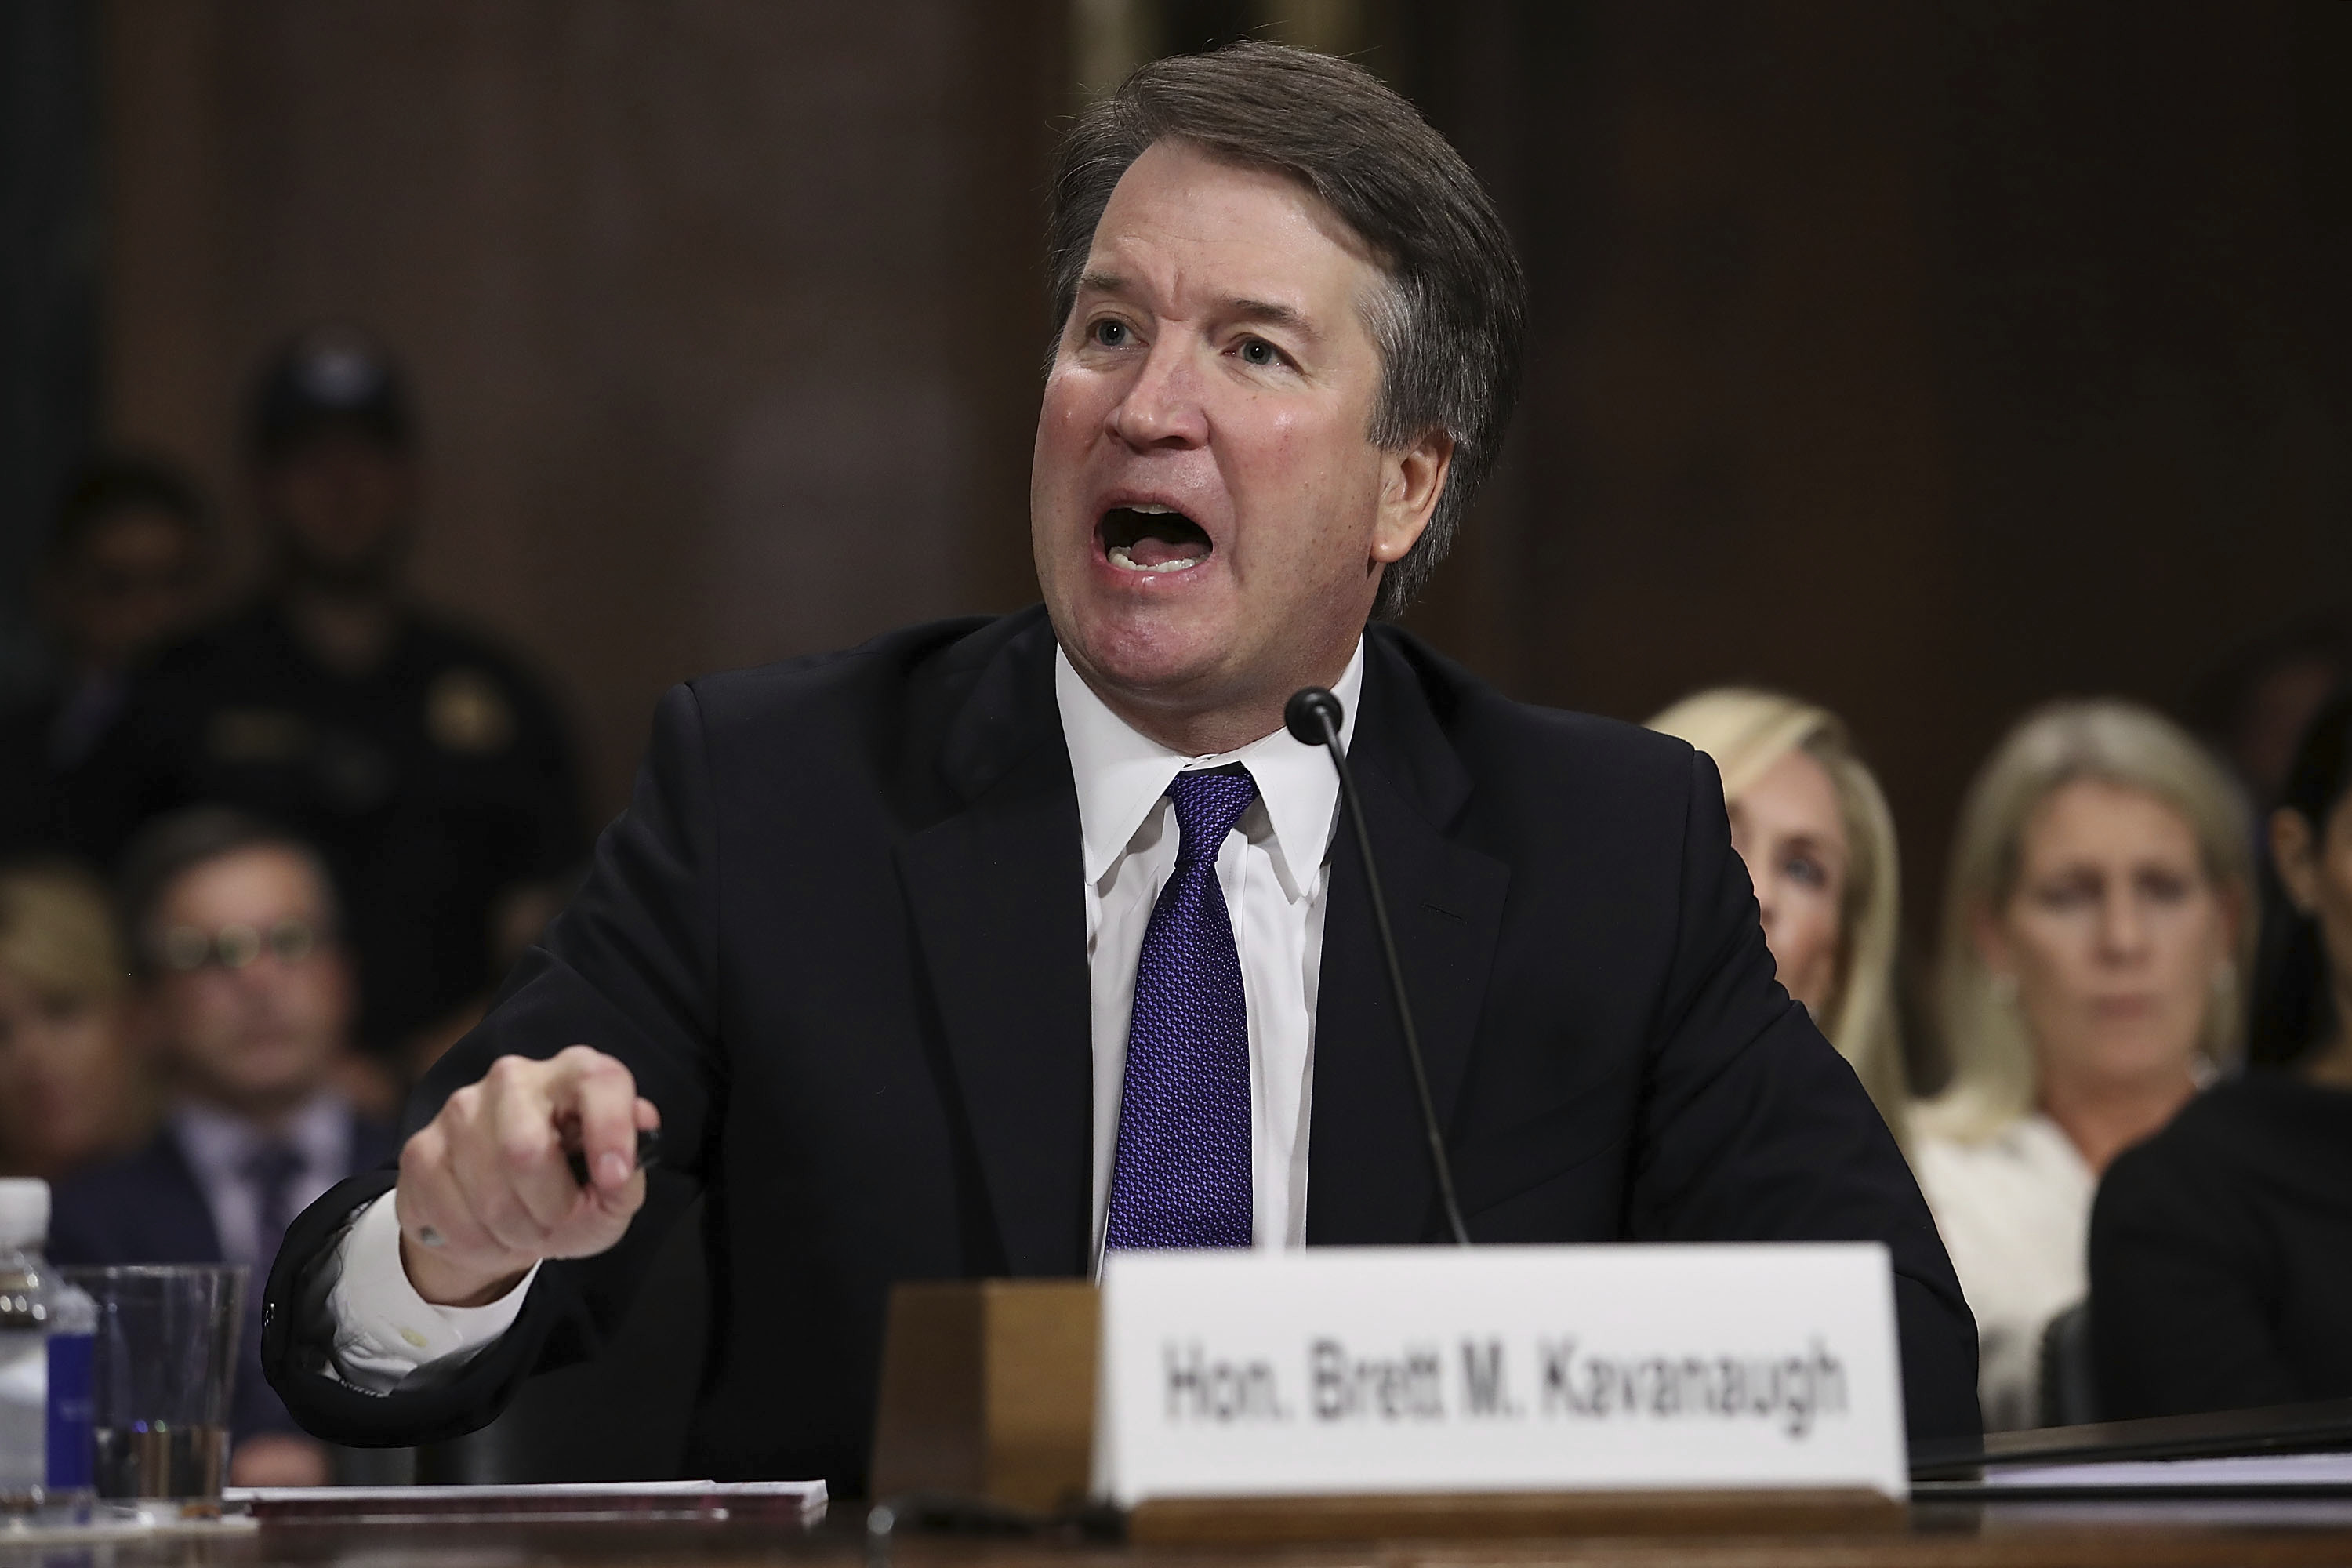 'They were laughing': Ford says her attacker was Kavanaugh